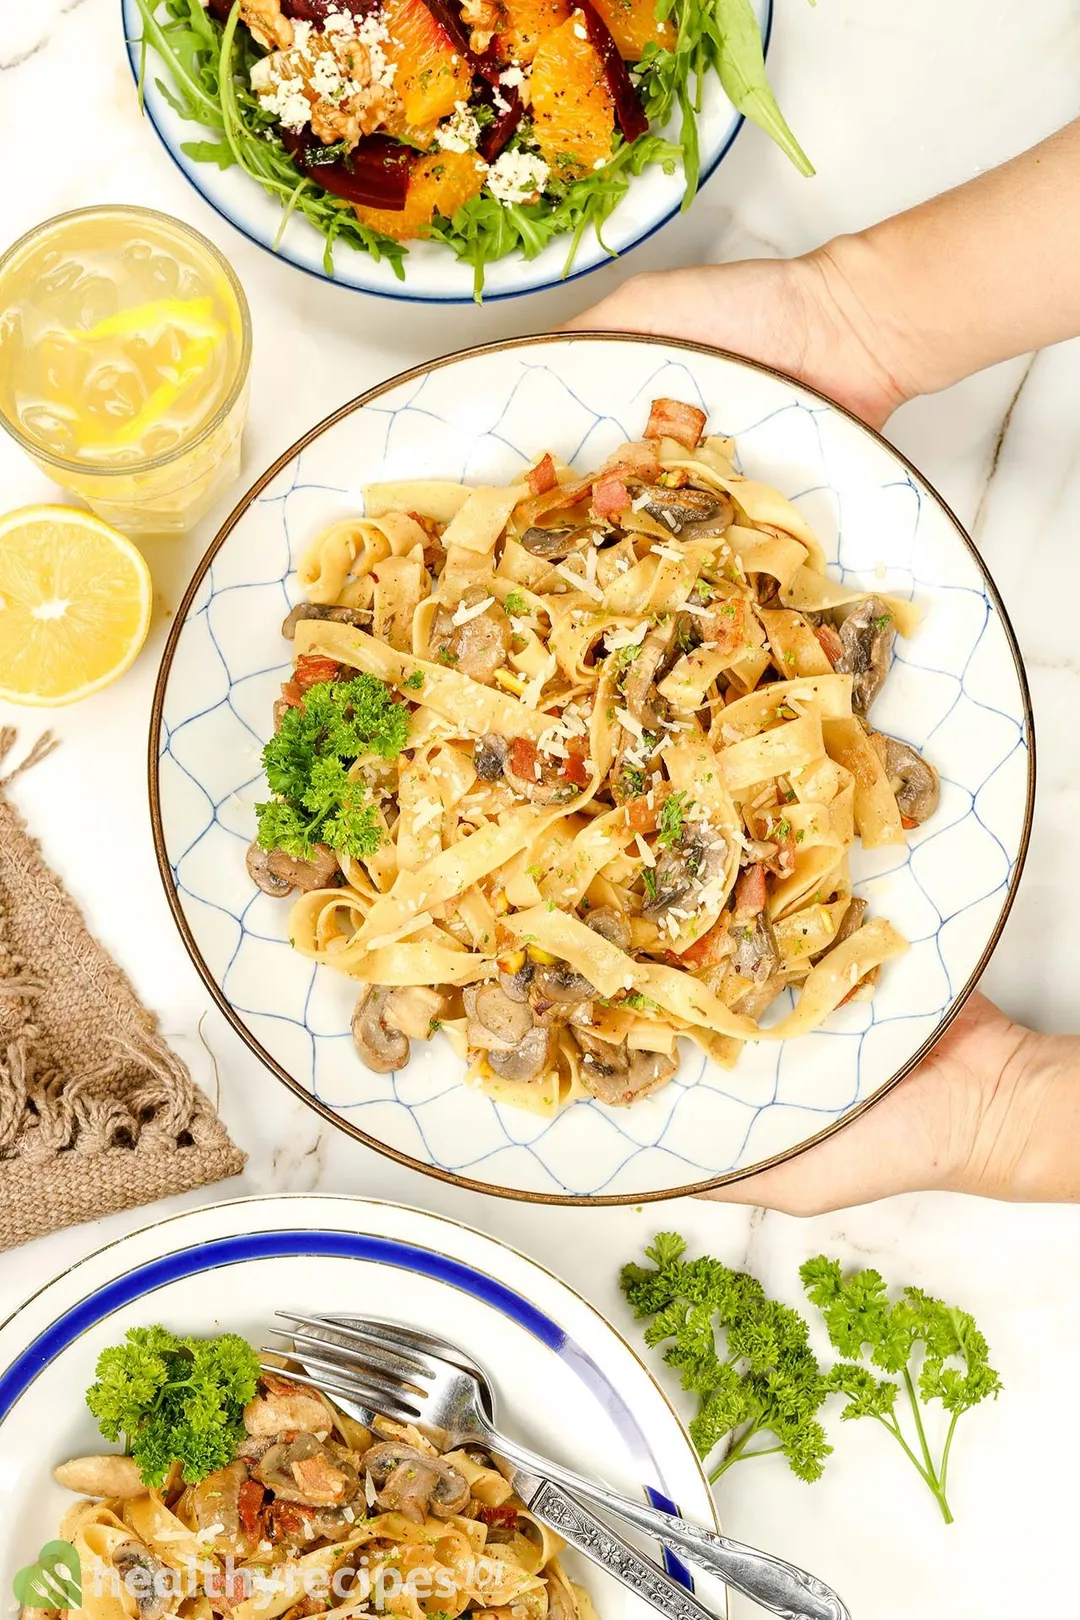 two hand holds a plate of cooked mushroom pasta next to a plate of salad, a glass of juice